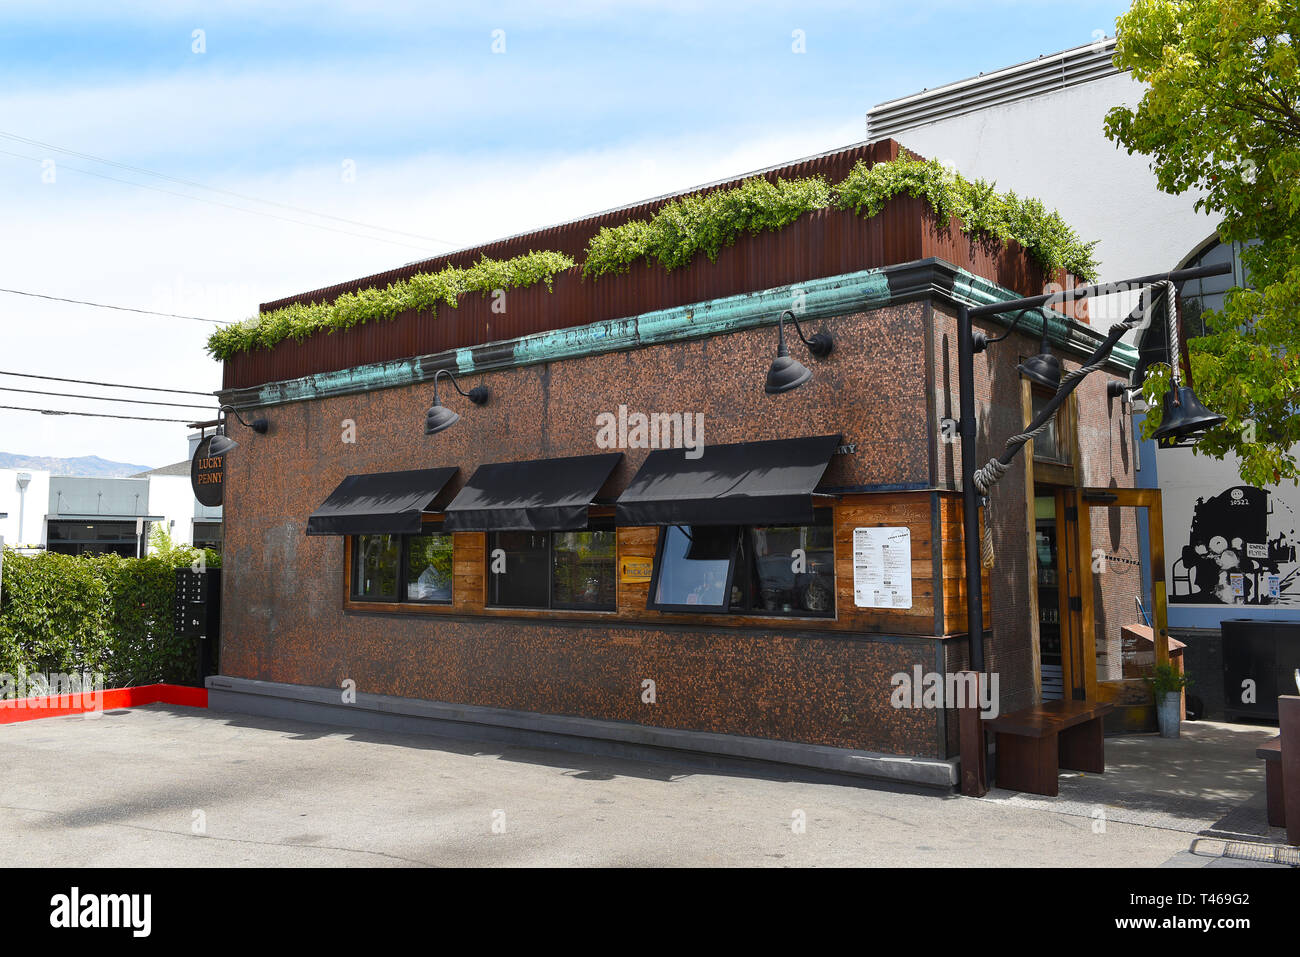 SANTA BARBARA, CALIFORNIA - APRIL 11, 2019: The Lucky Penny is a Combo pizzeria and coffeehouse featuring java, wood-oven pies and pastries in low-key Stock Photo